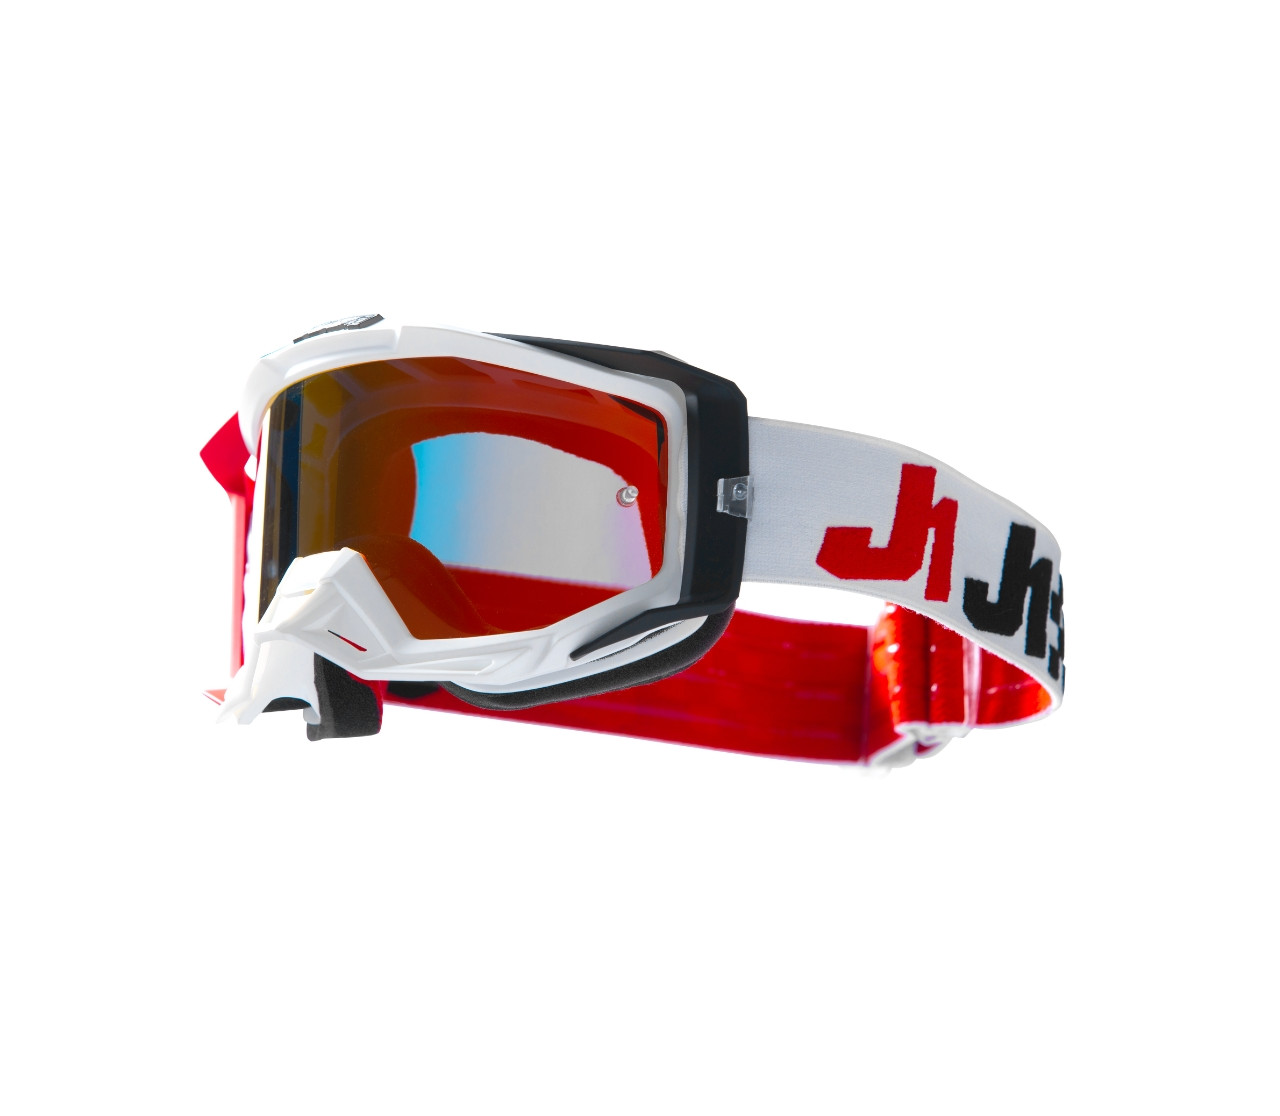 JUST1 GOGGLE IRIS 2.0 RACER BLACK - RED - WHITE MIRROR RED LENS